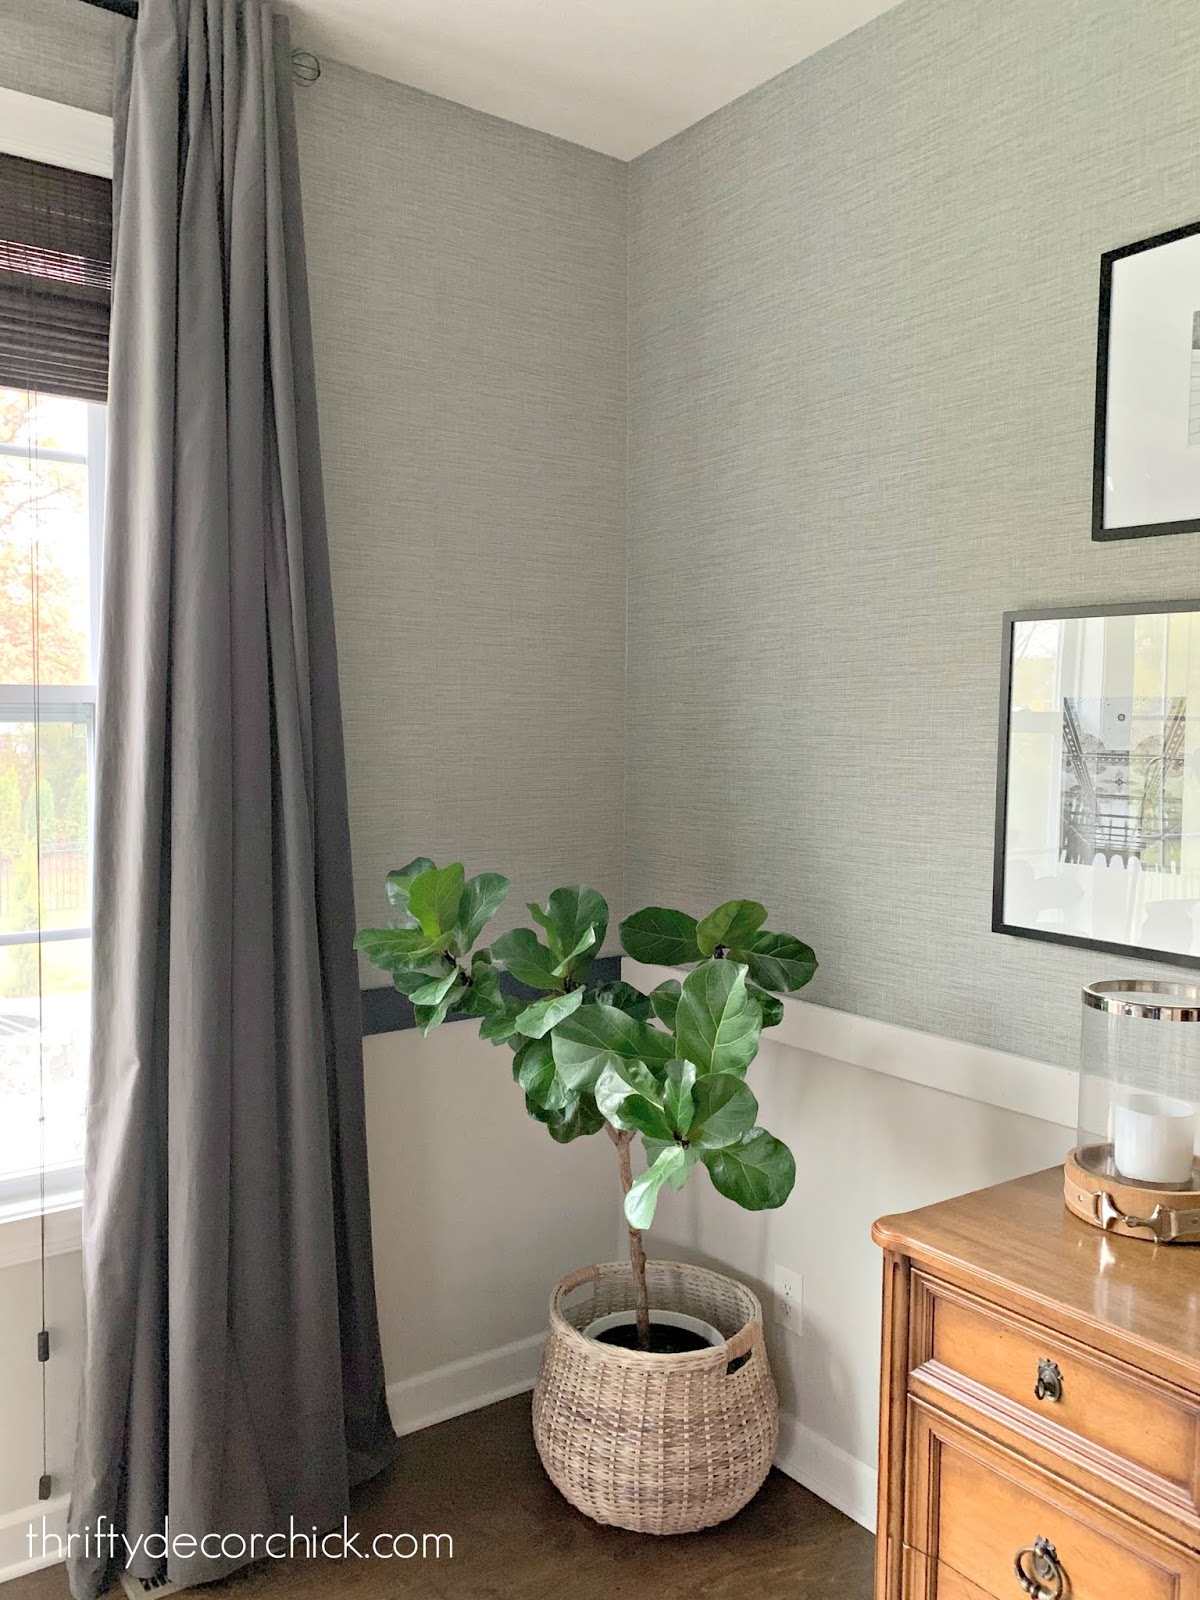 The Gray Grasscloth Wallpaper on our Bedroom Walls | Thrifty Decor Chick |  Thrifty DIY, Decor and Organizing